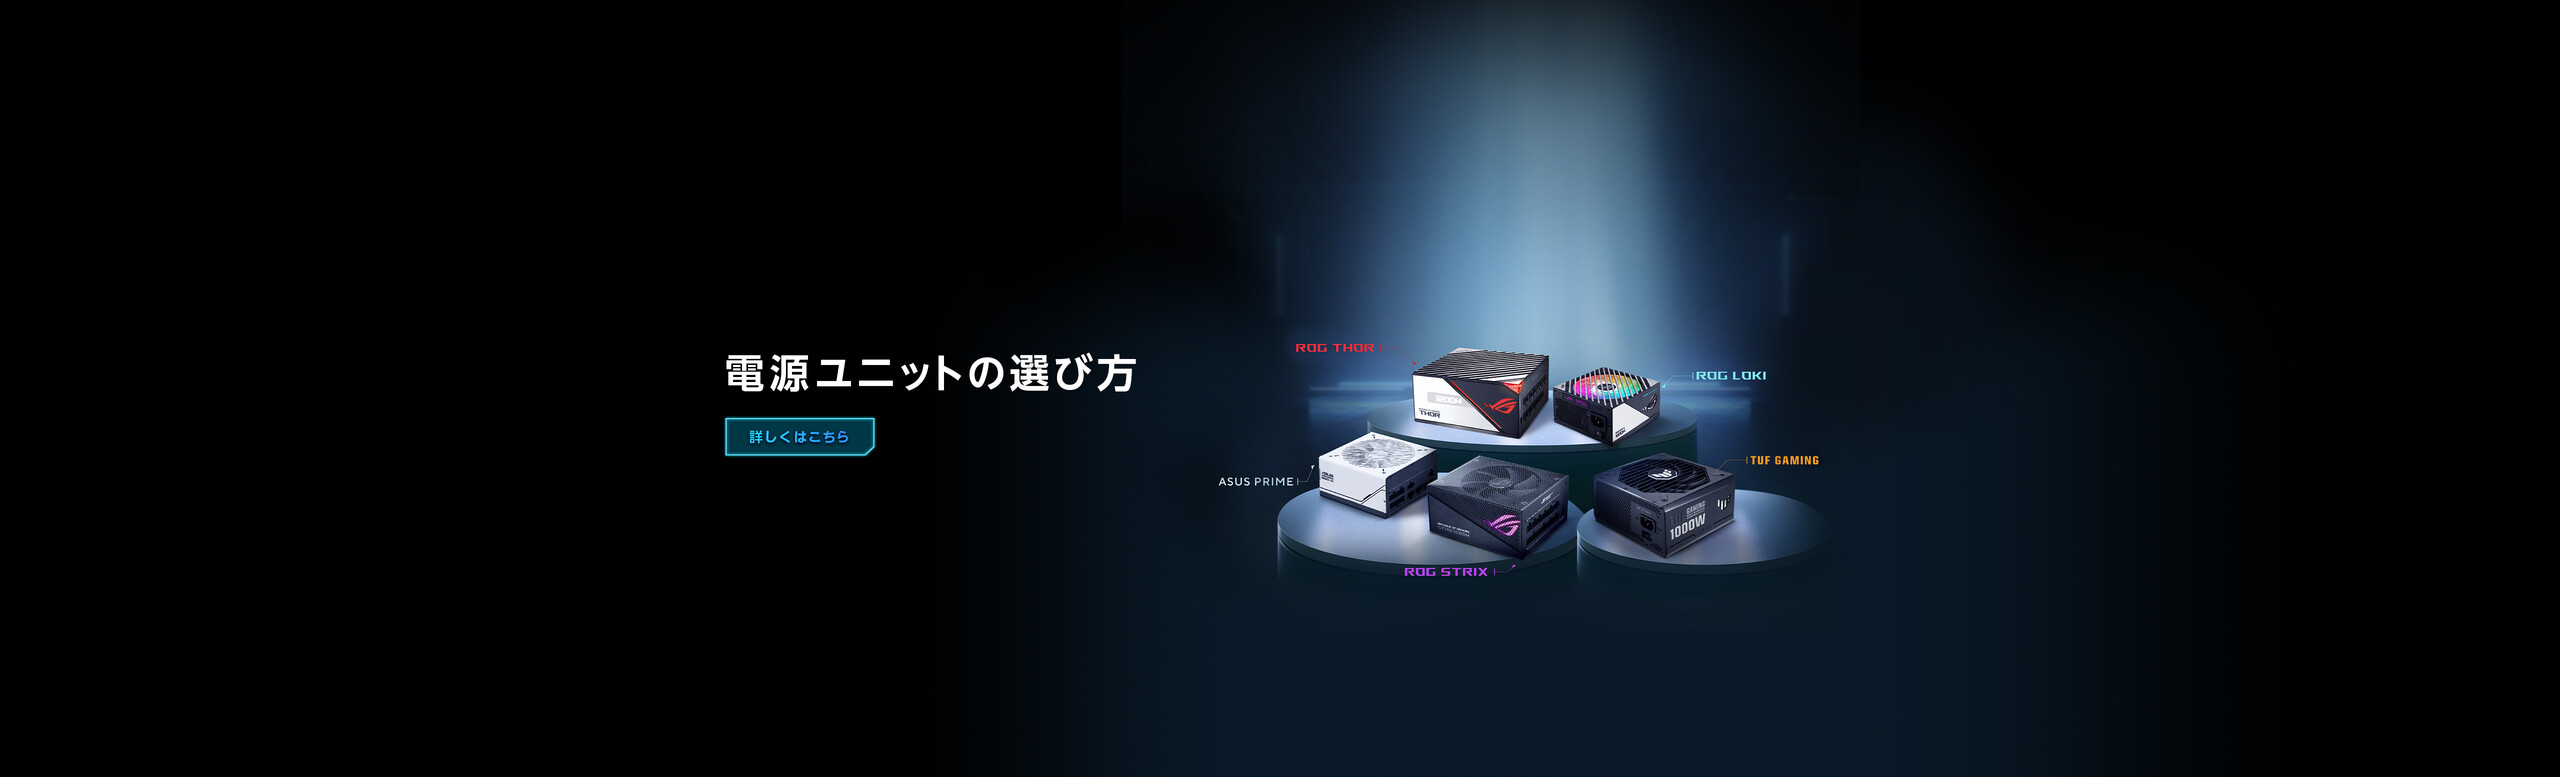 Pick the right PSU for your build, learn more, ROG Thor, ROG Strix, TUF Gaming, ROG Loki. ASUS power supply series banner